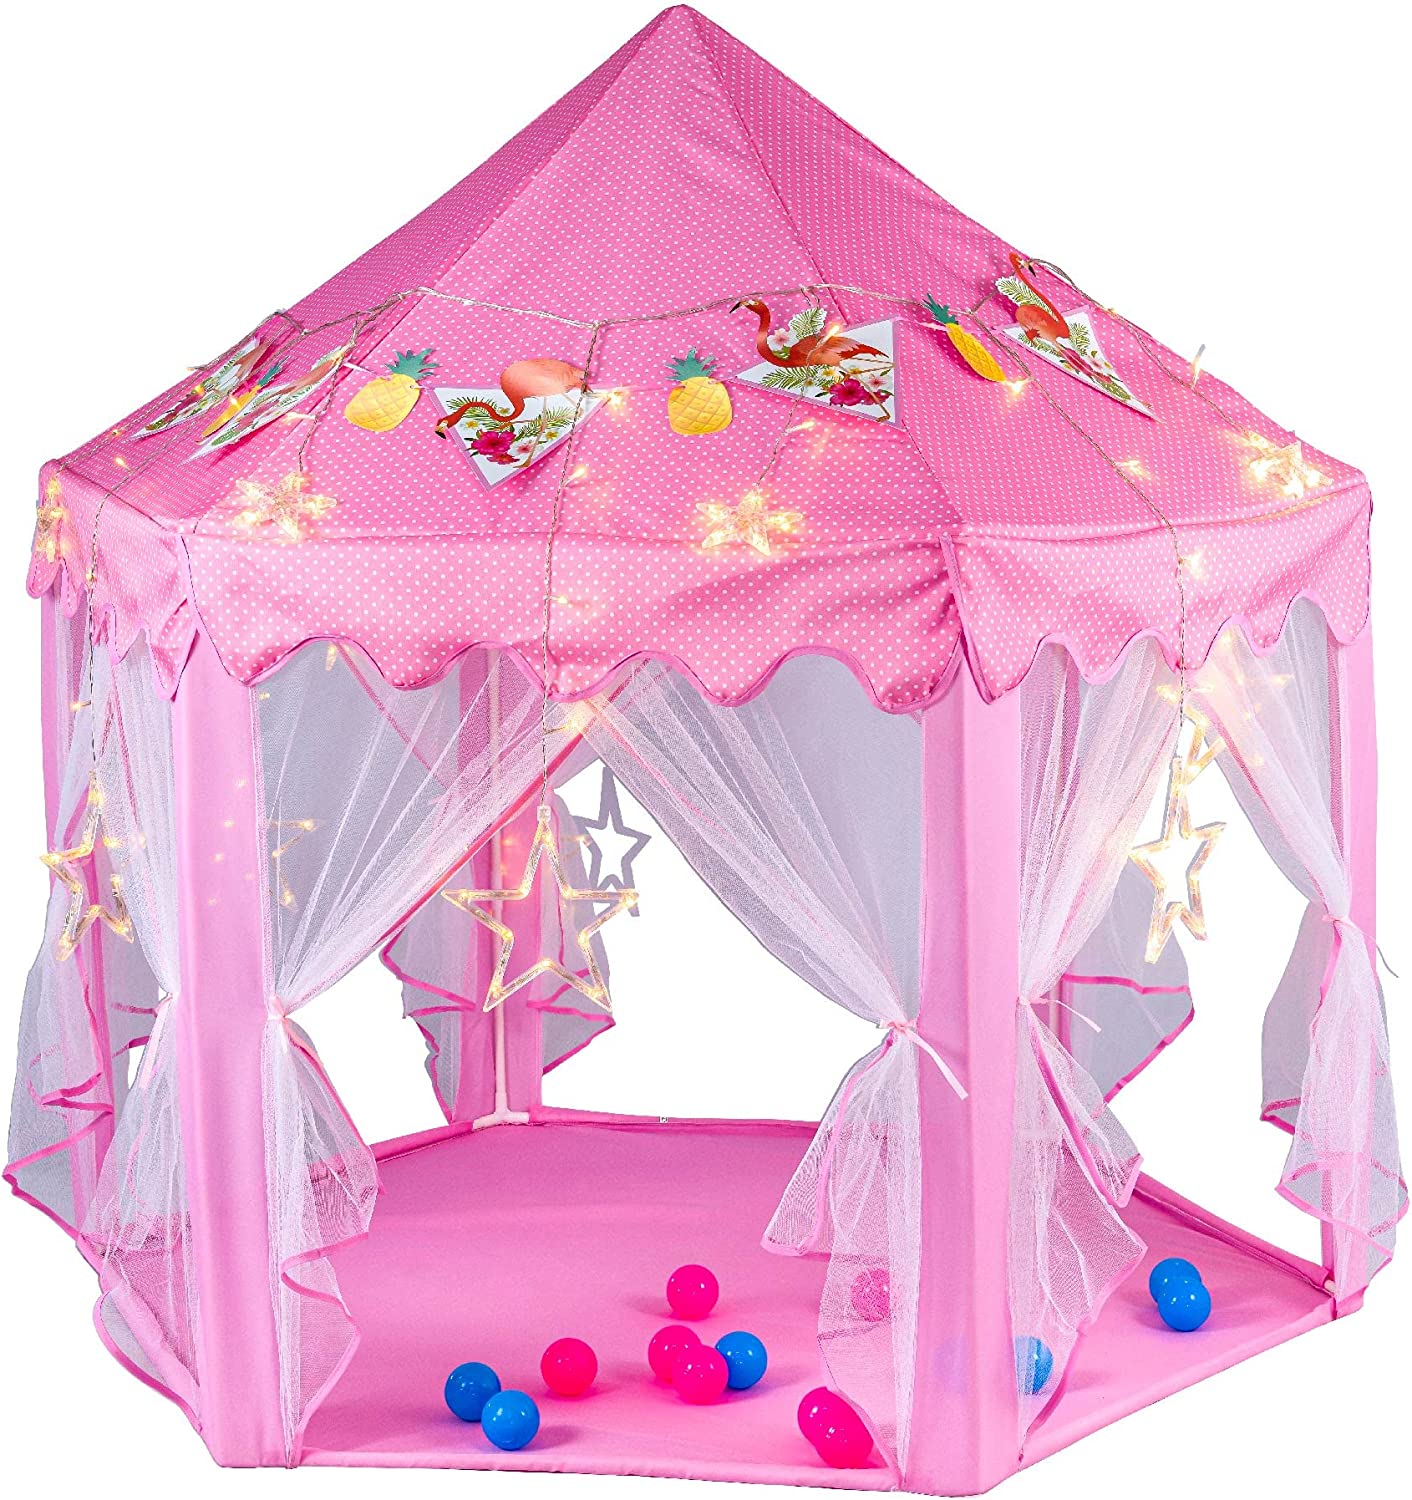  1. Twinkle Star Princess Castle Play Tent with LED Star 